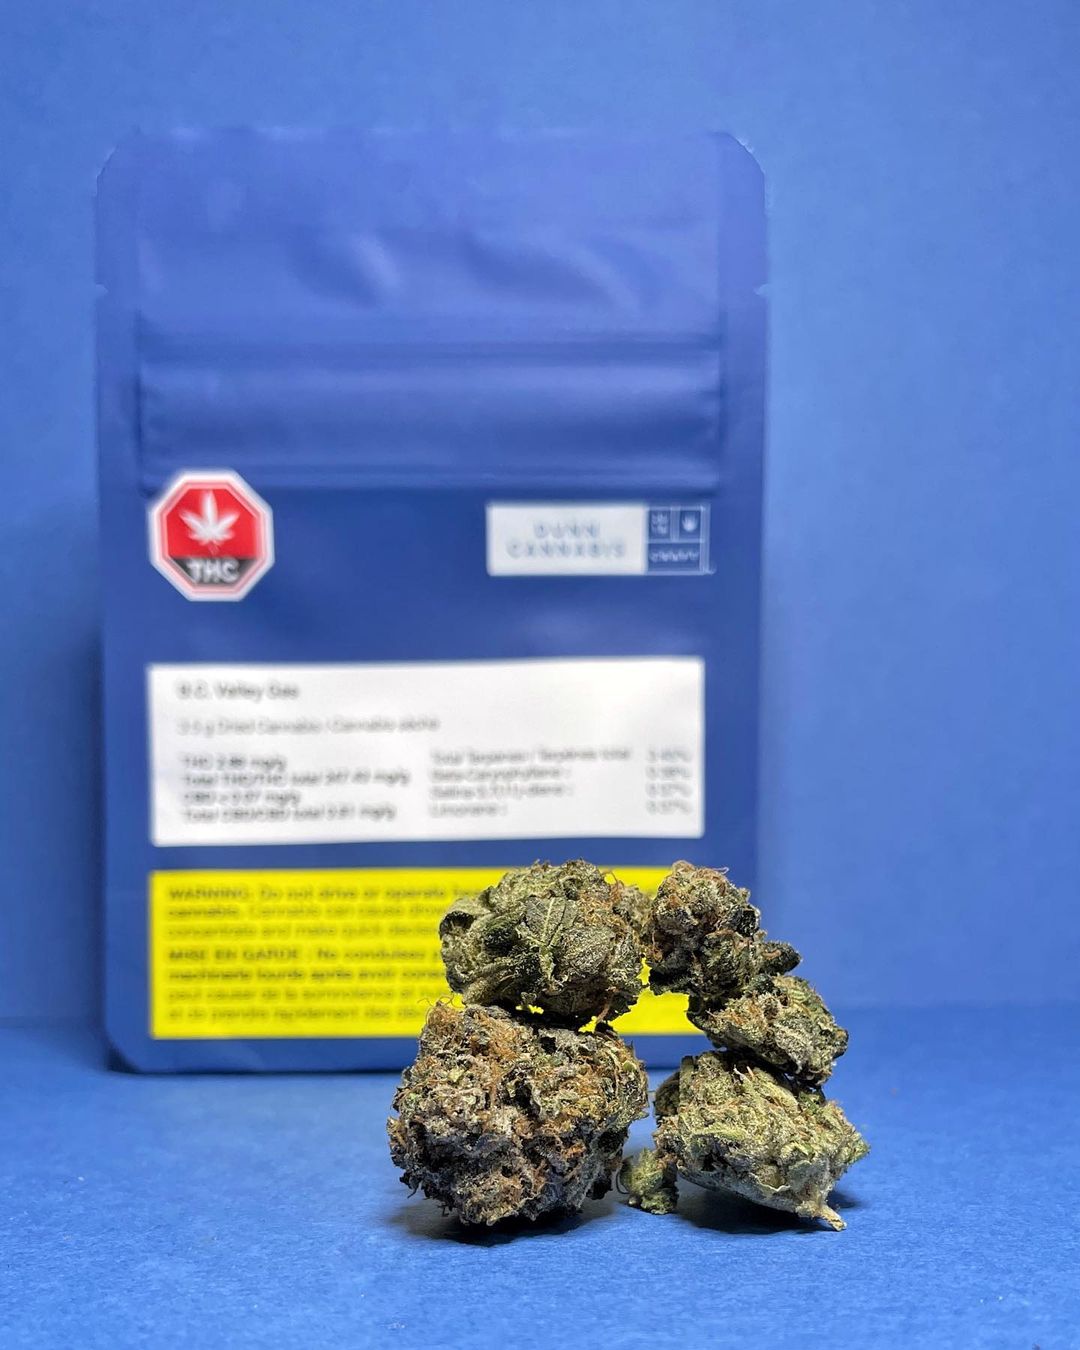 Scarborough Dispensary, Scarborough Dispensary Cannabis: BC Valley Gas Strain Review